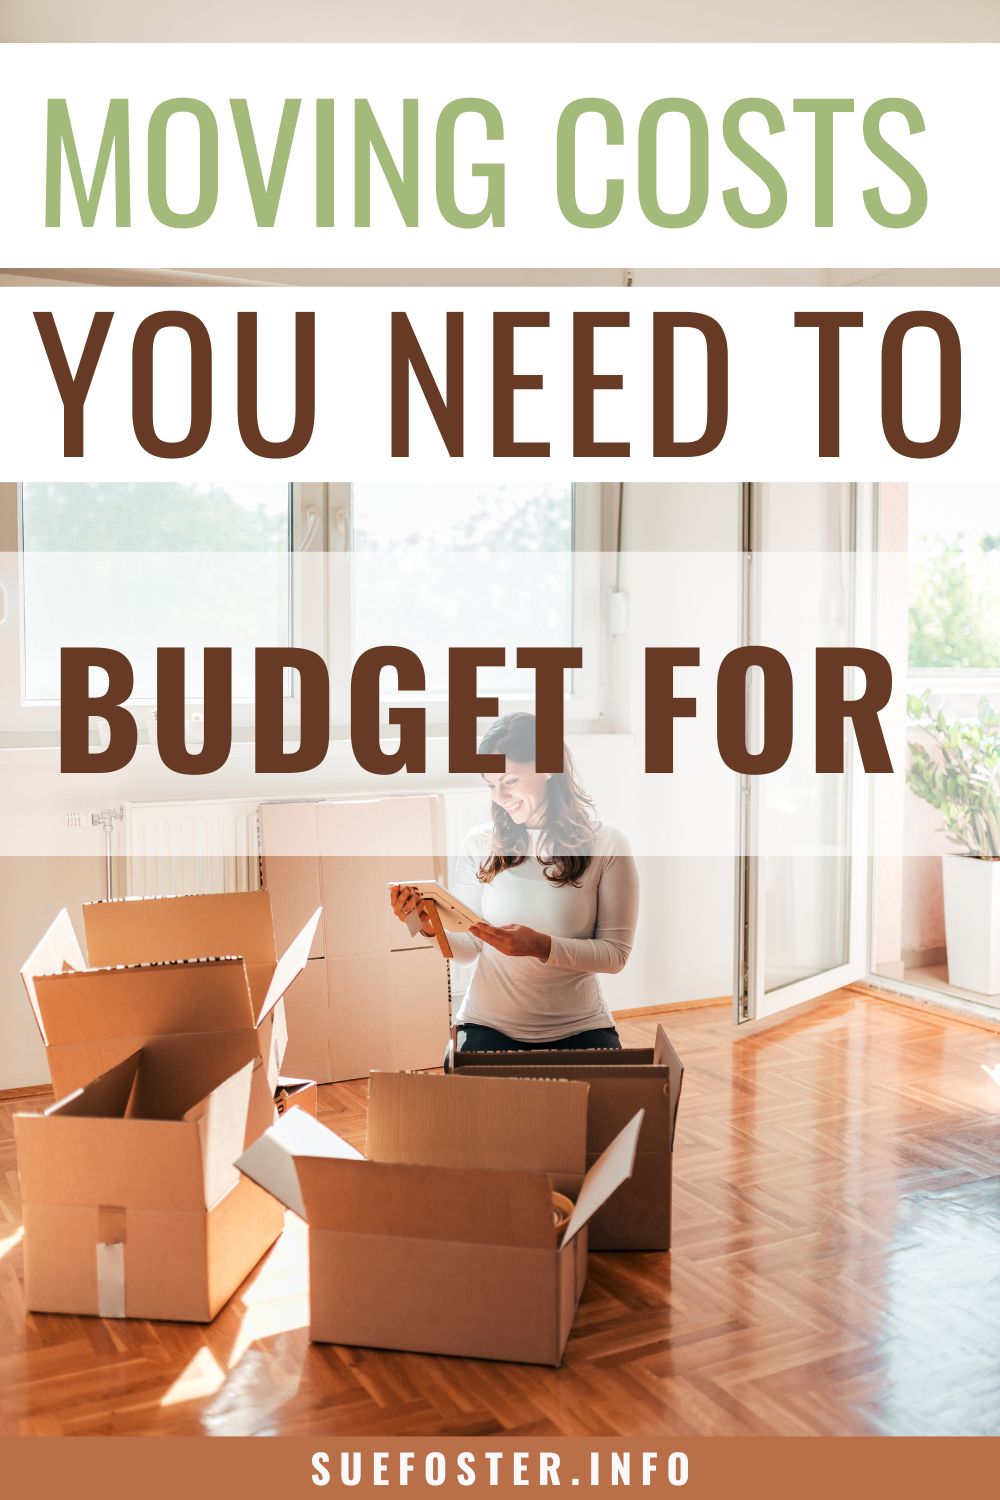 Here are some of the unforeseen moving costs you might experience. 